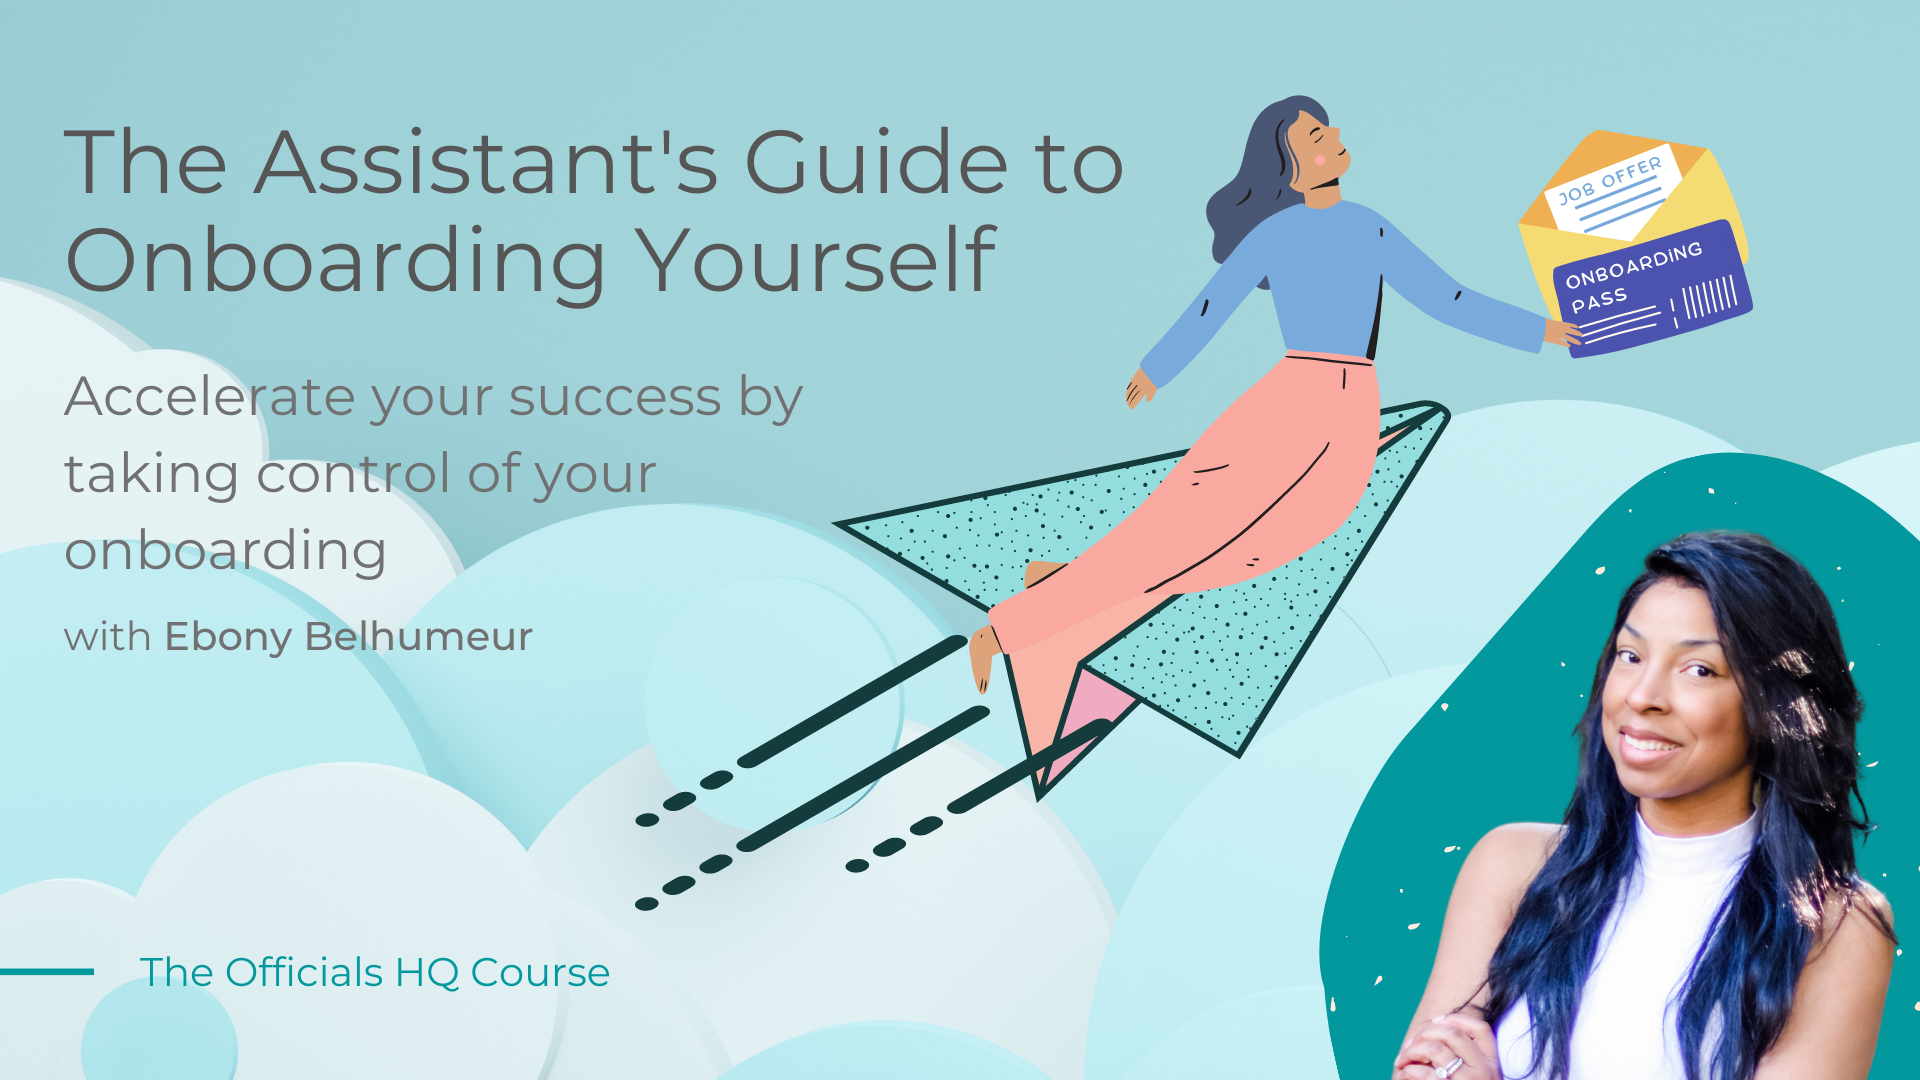 The Assistant’s Guide to Onboarding Yourself Course